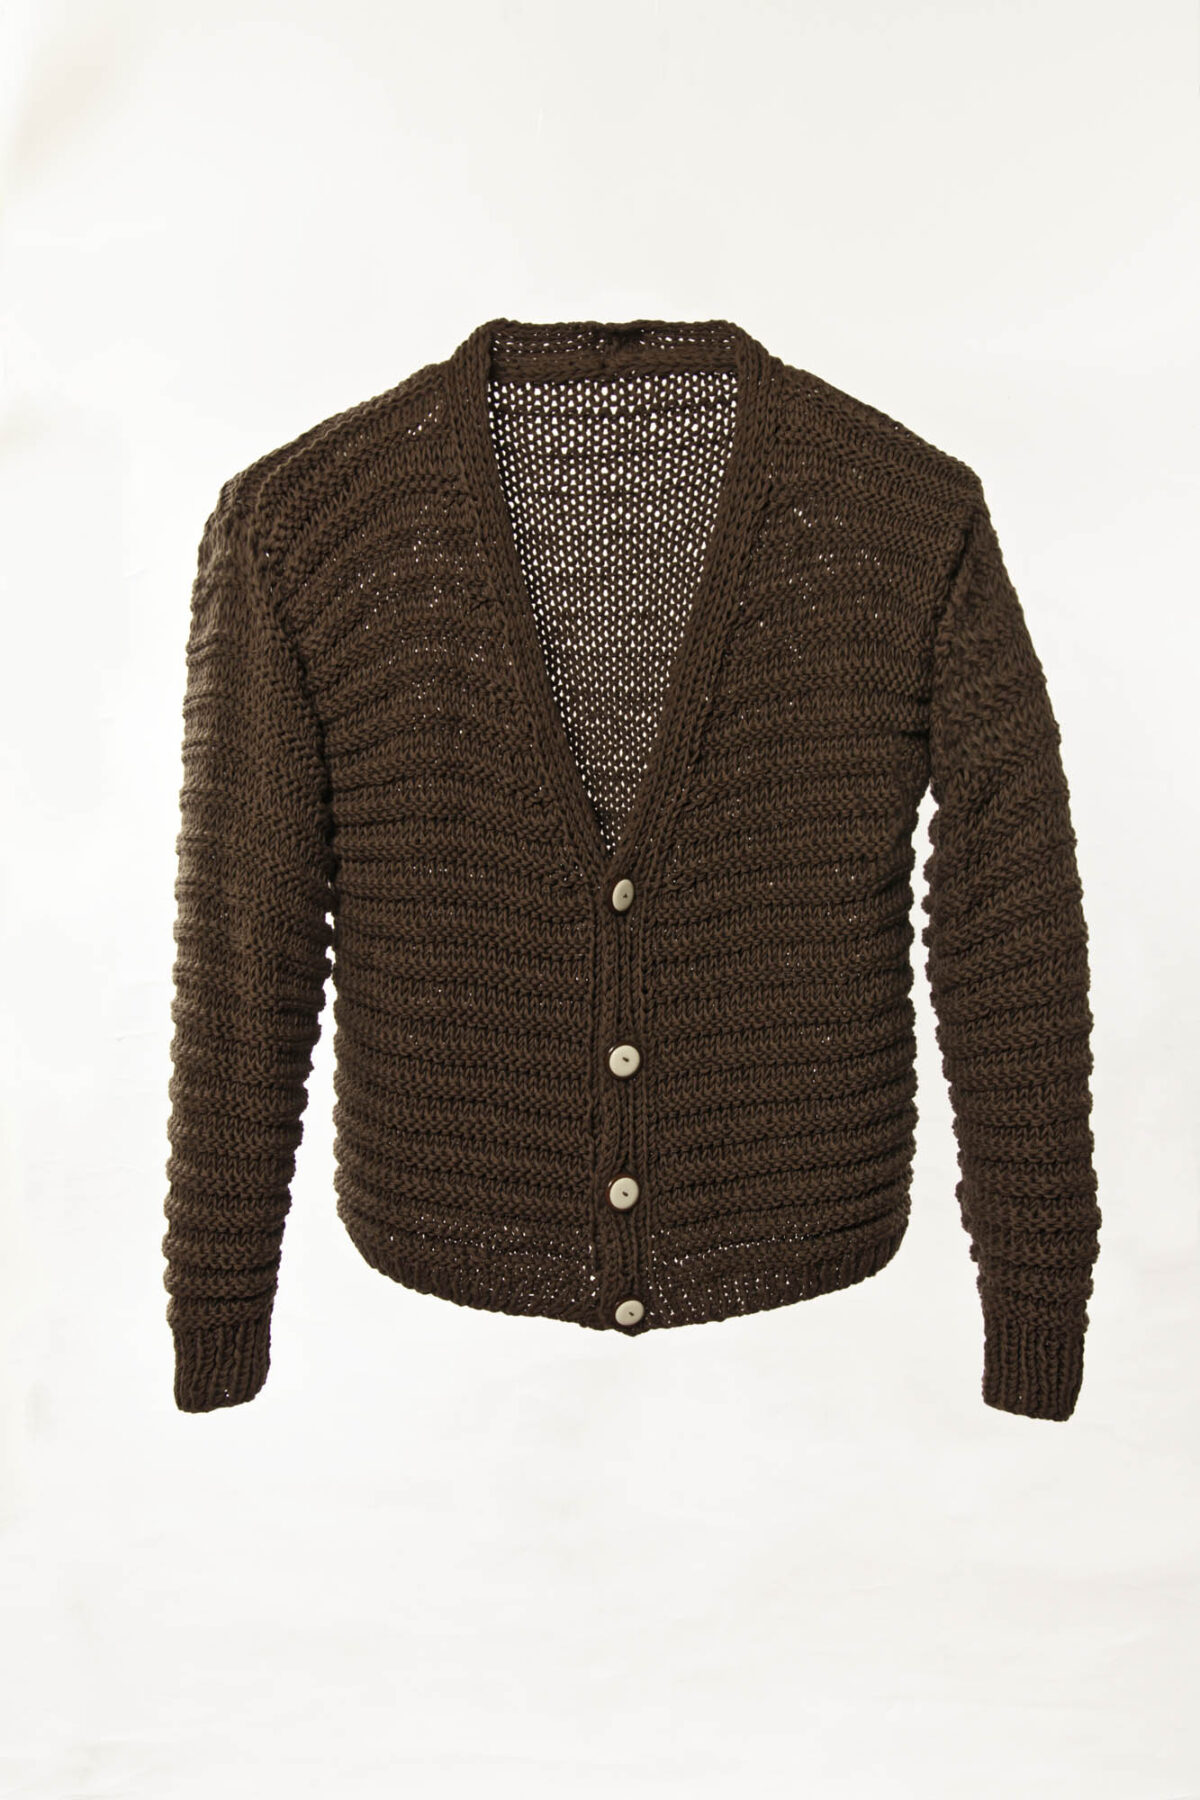 Cardigan hand-knitted ribebd placket - 4 button closure